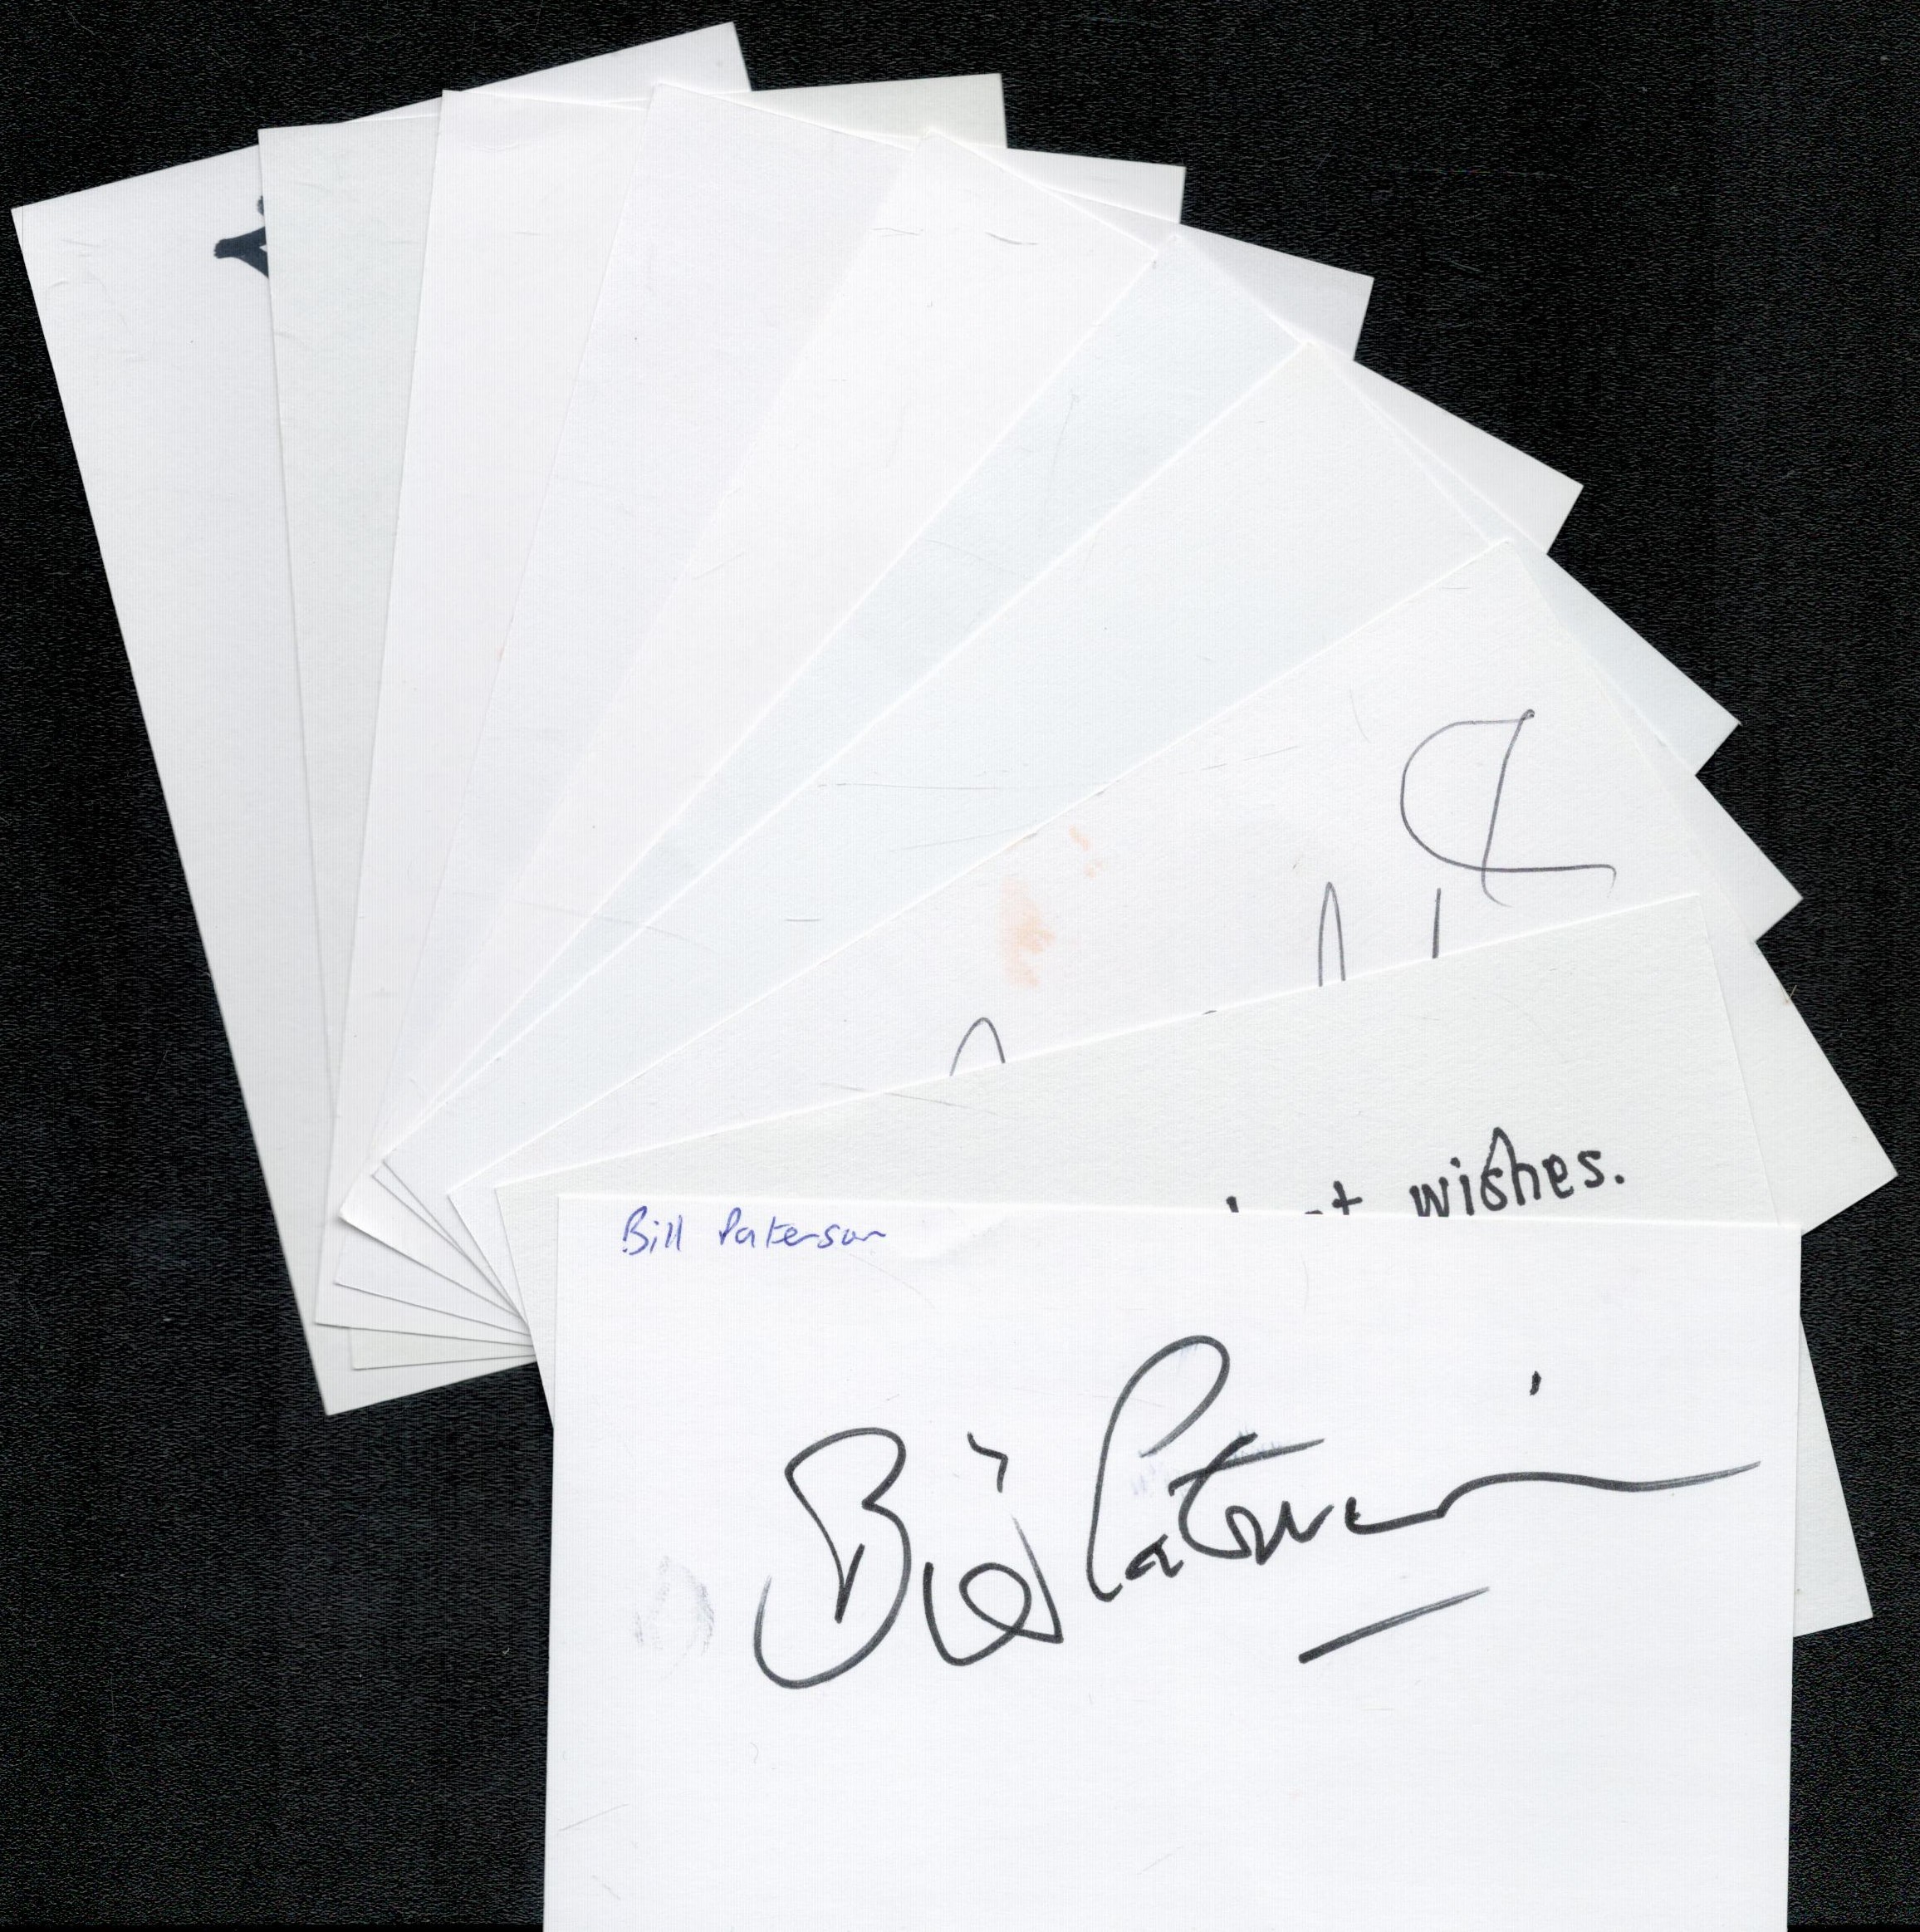 Actresses/Actor. 10 x Collection of signed White Cards Approx. 5x3 Inch. Signatures such as Jasmin